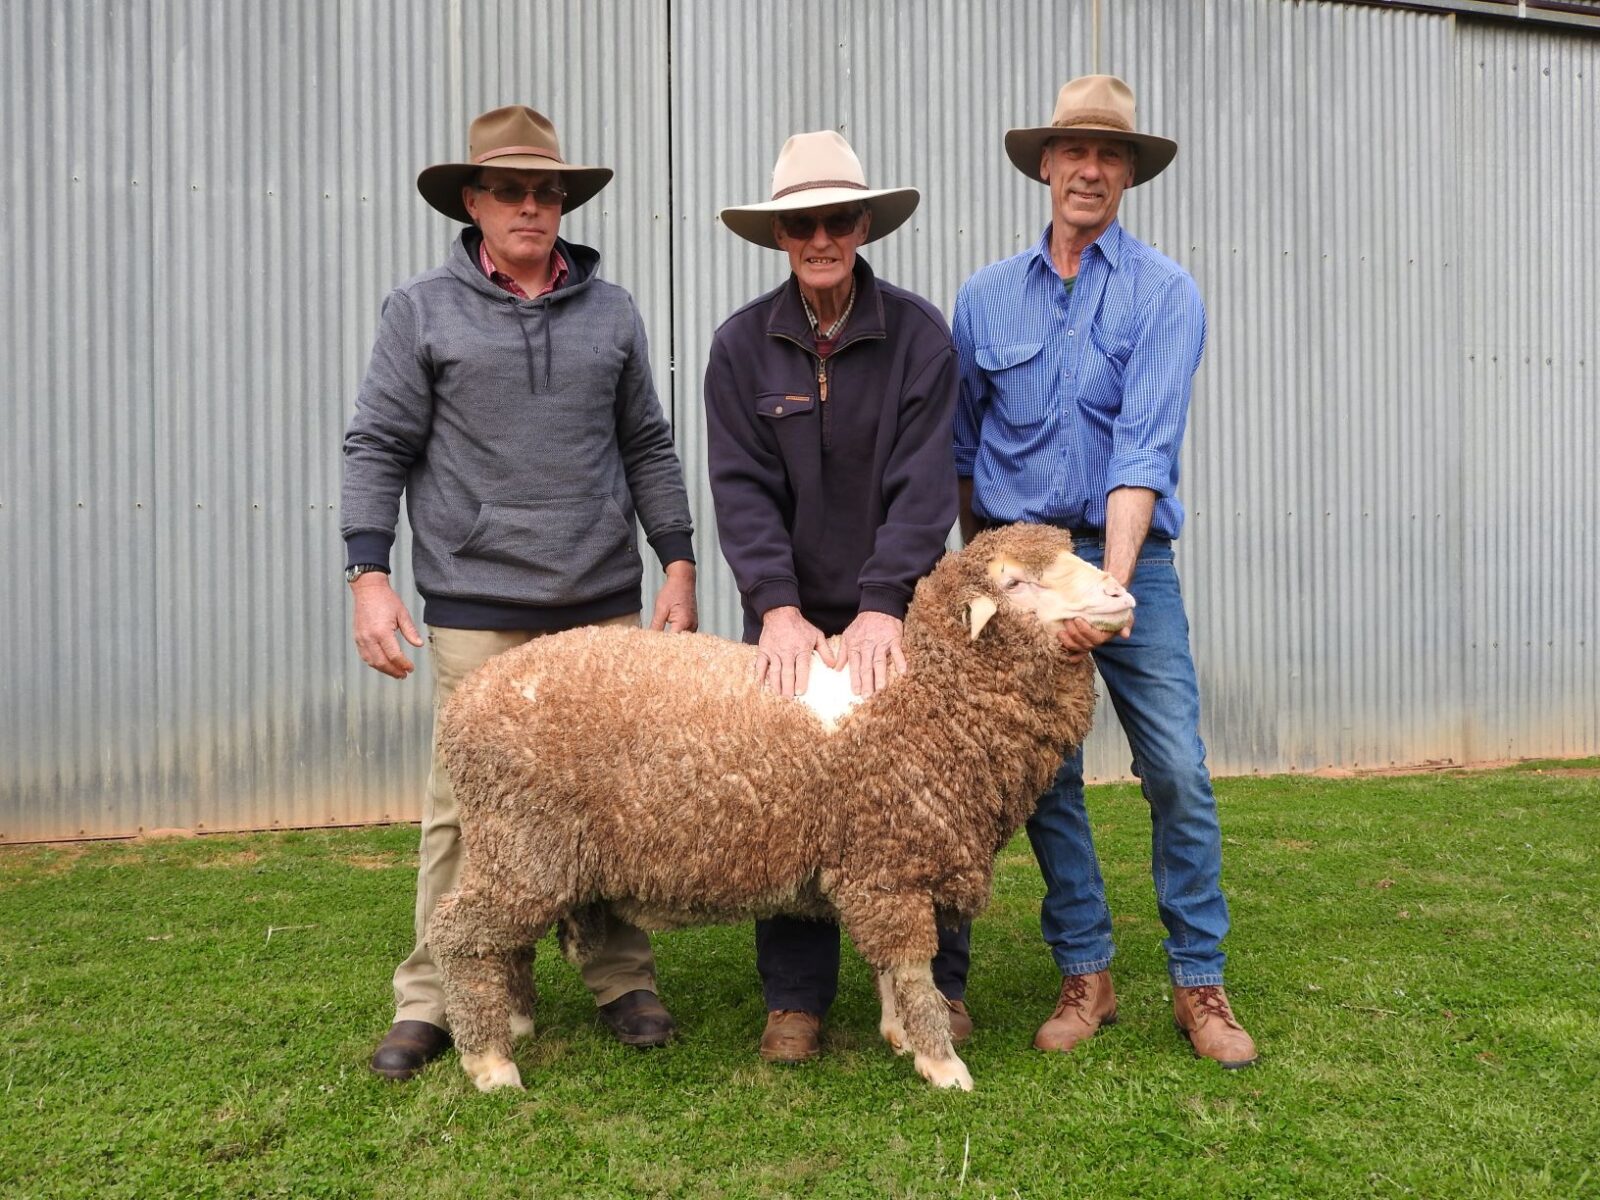 2020 3rd Top priced. Chris & Max Webb with 3rd Top Priced Ram